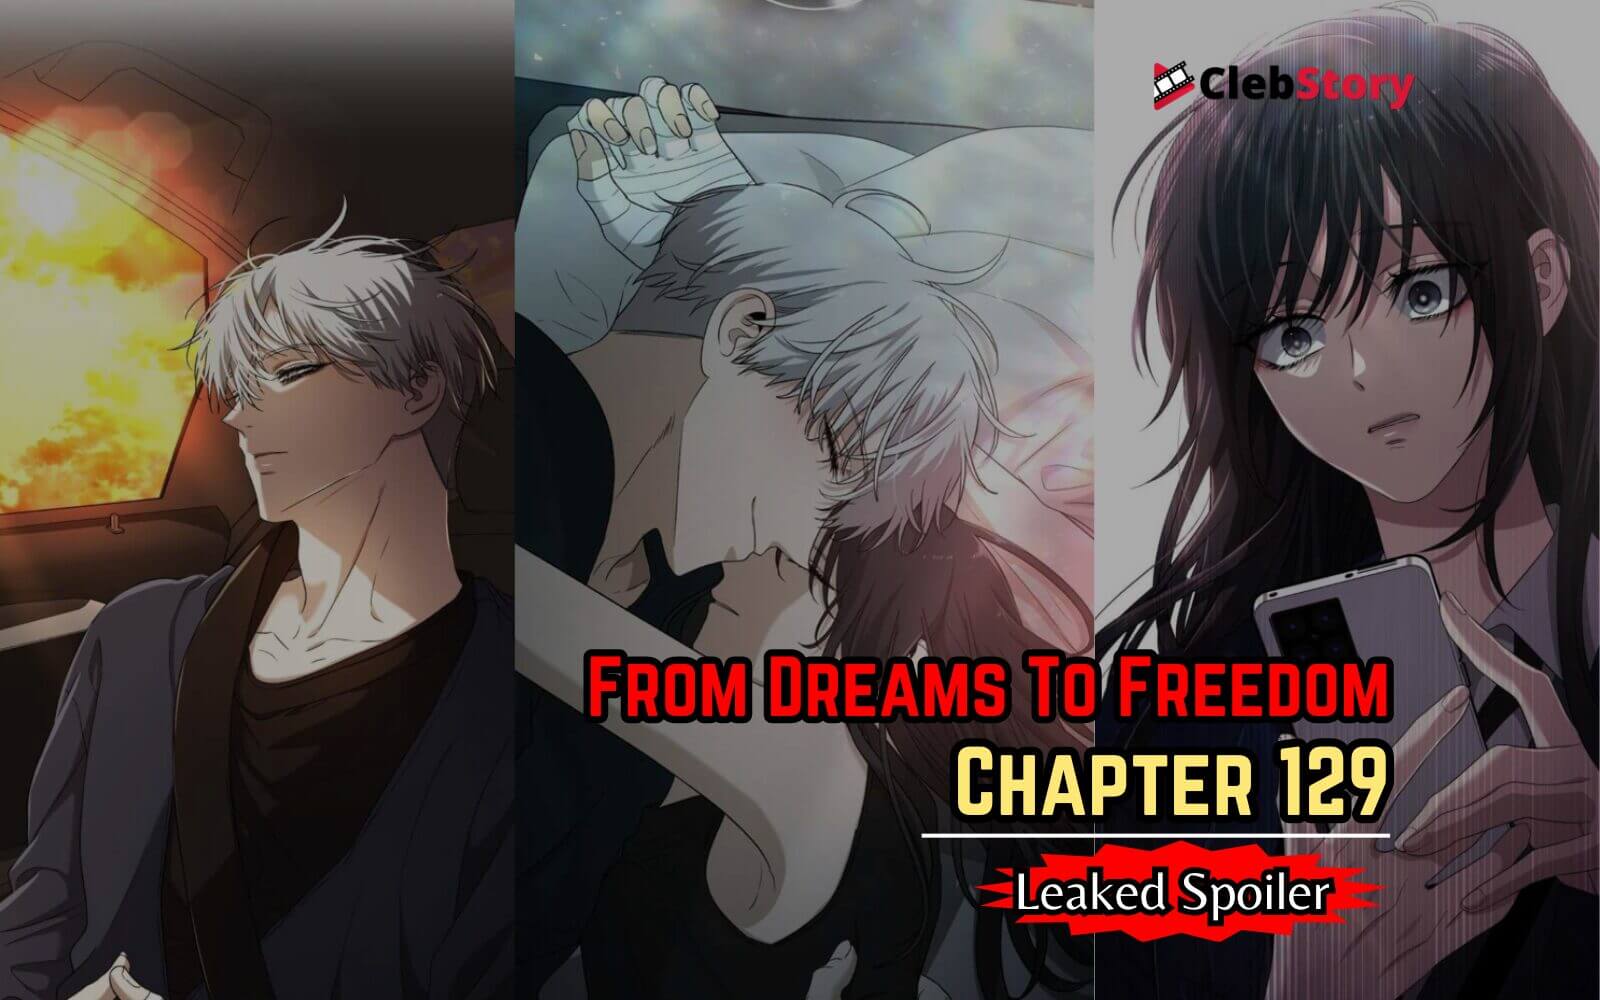 From Dreams To Freedom Chapter 129 Official Spoiler